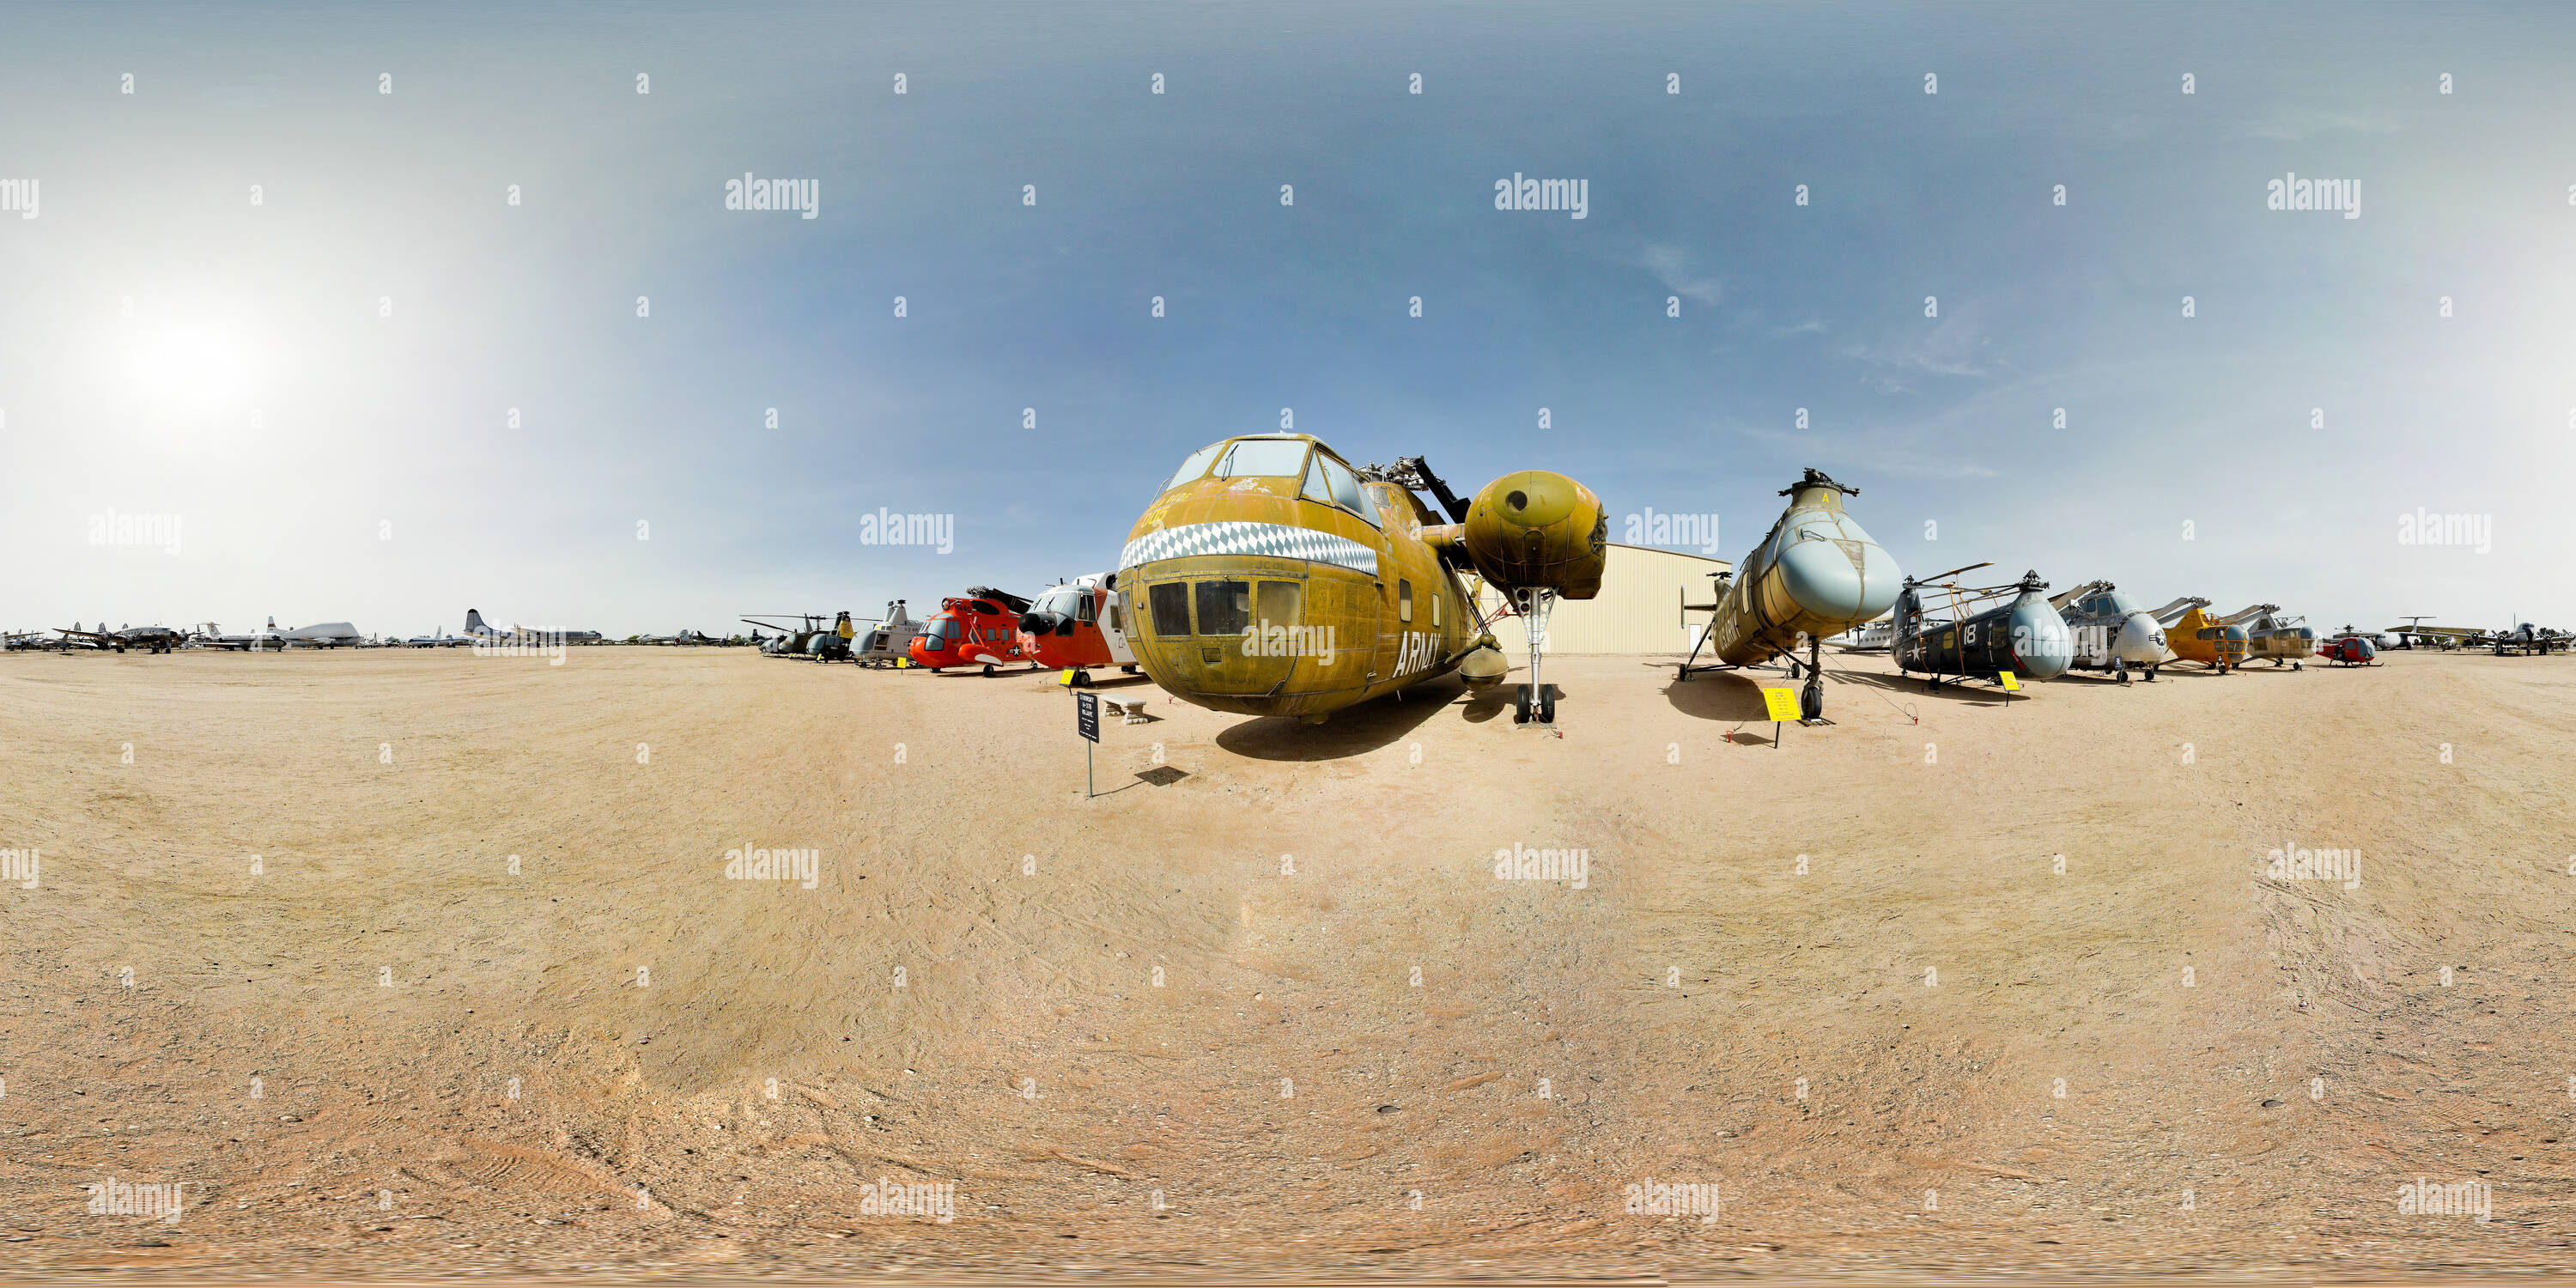 360 degree panoramic view of Helicopter Row, Pima Air and Space Museum, Tucson